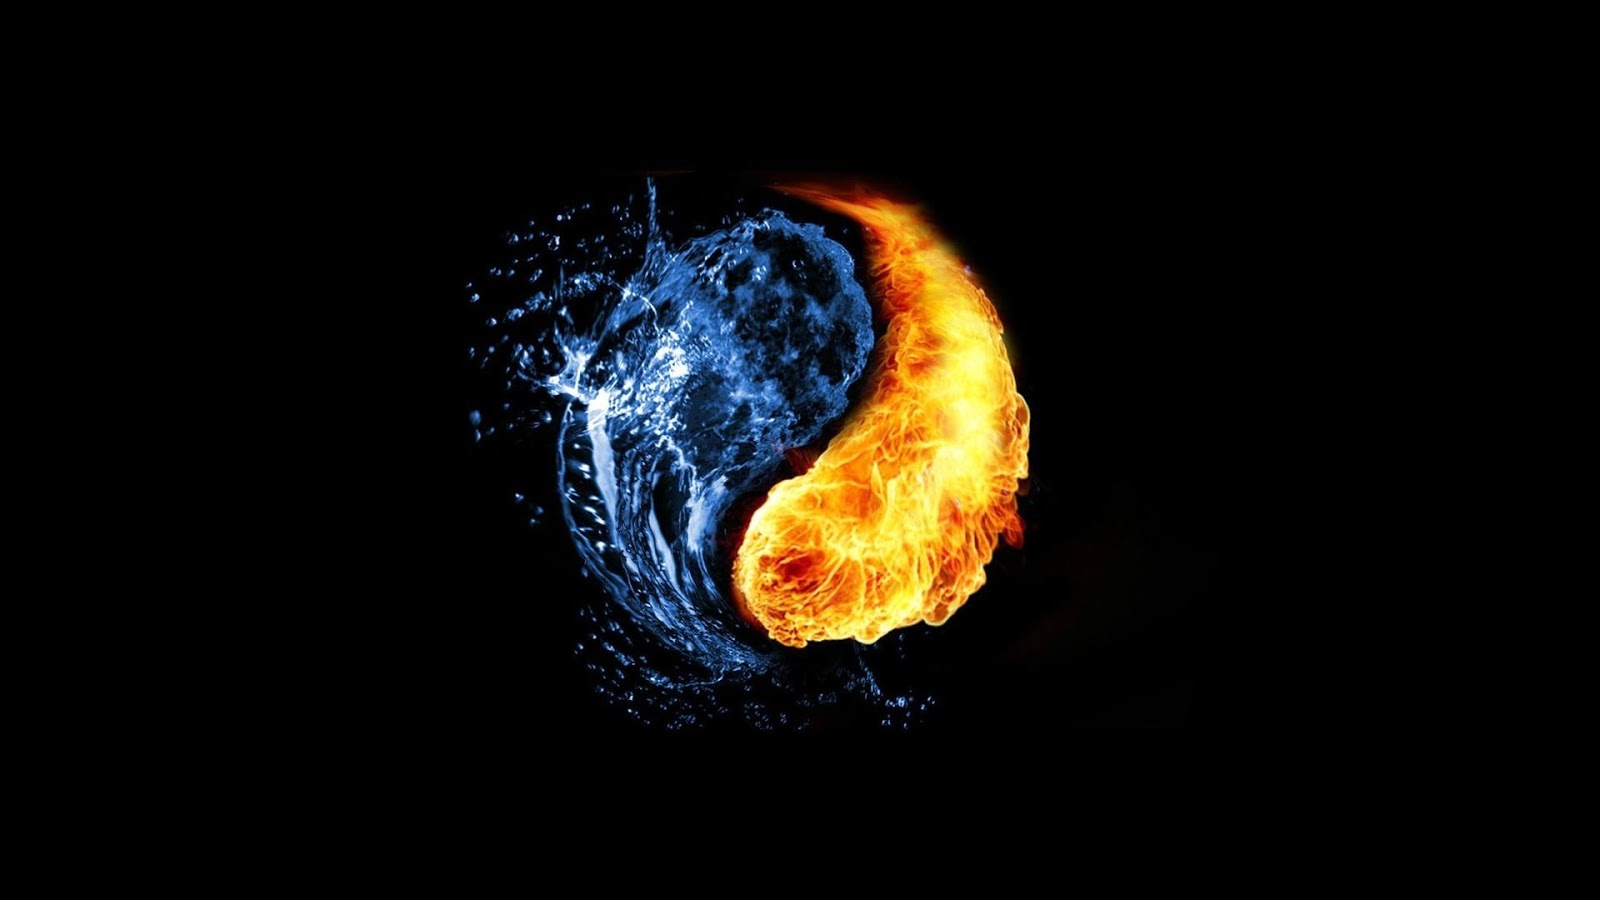 Fire And Ice Live Wallpaper 130 Apk Download Android